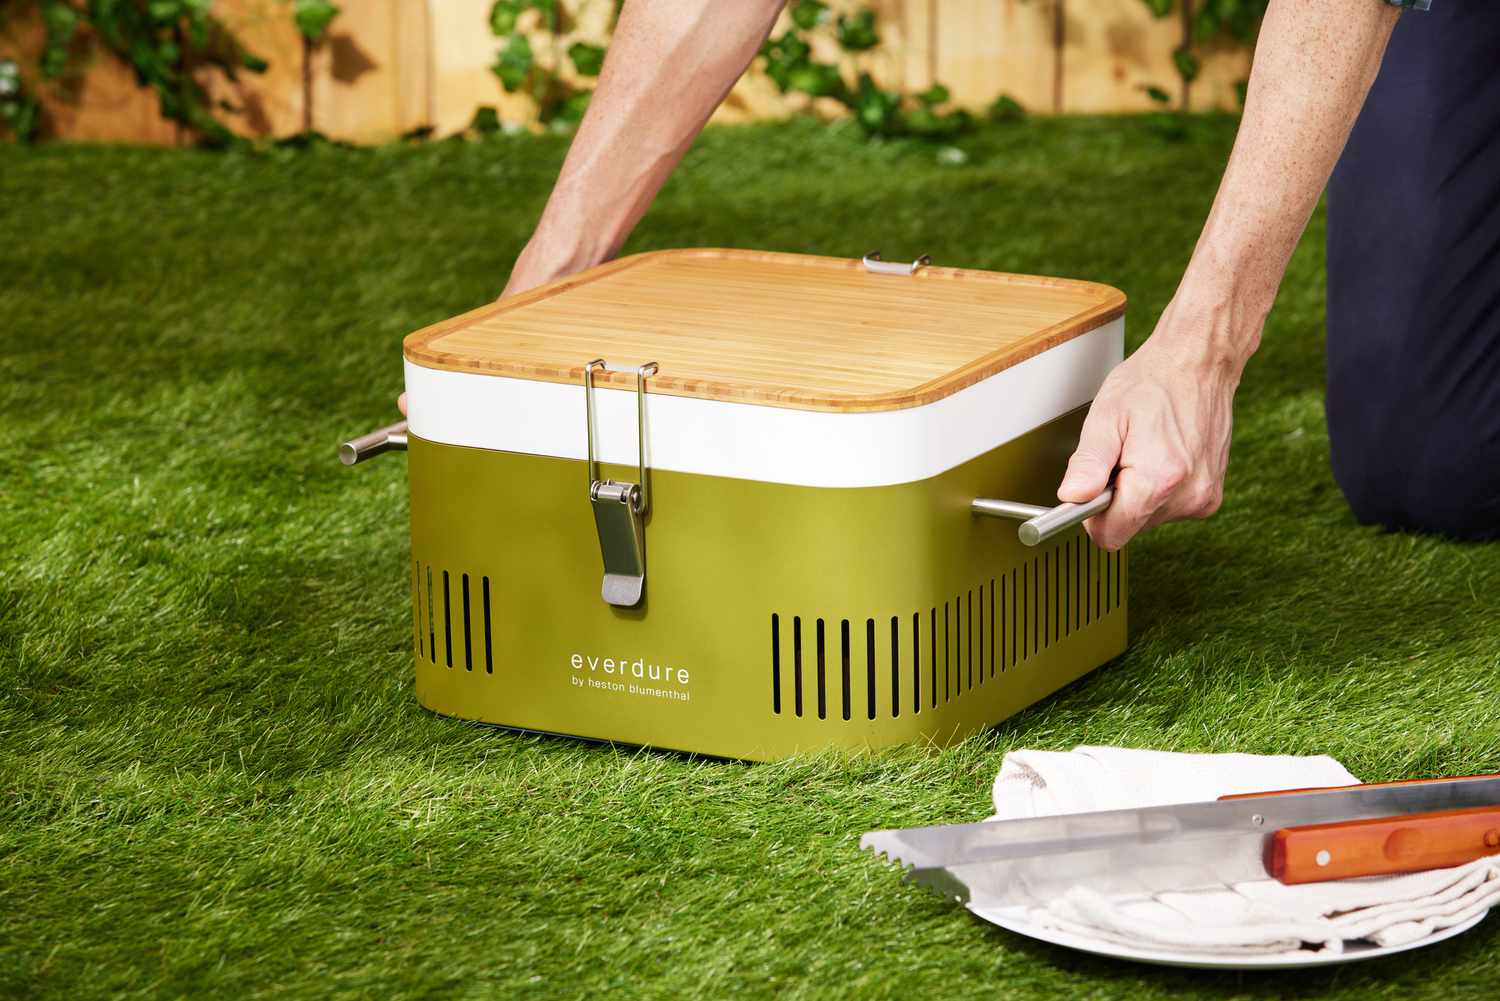 Person lifting the Everdure Cube Portable Charcoal Grill from grass